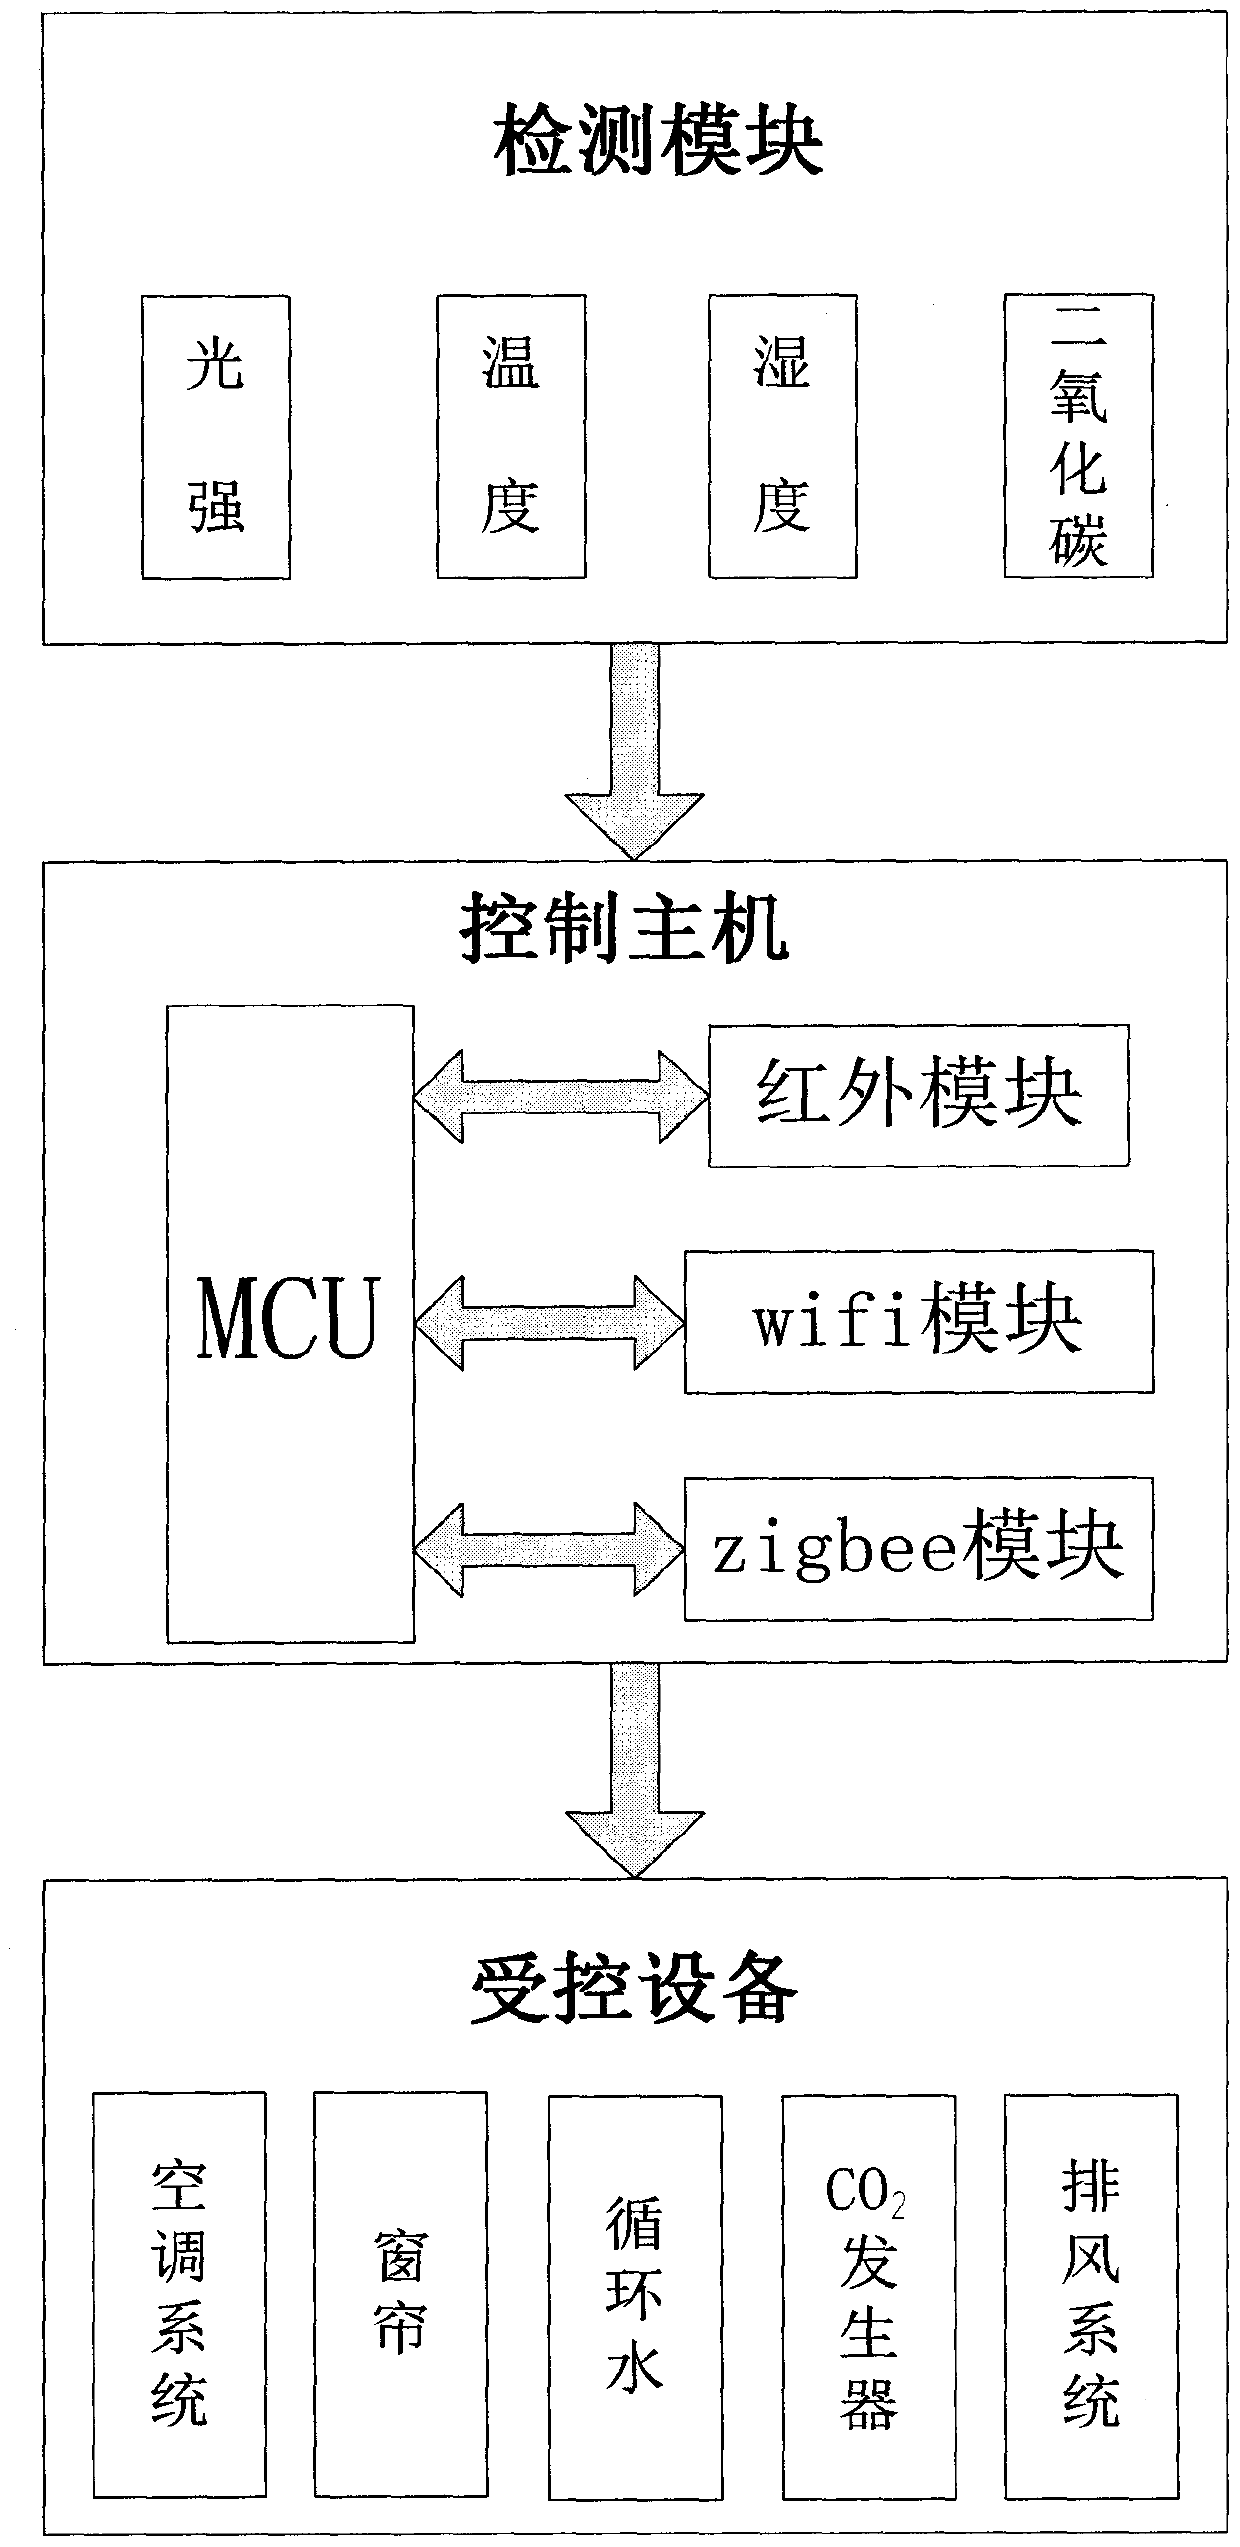 Wireless measurement and control device